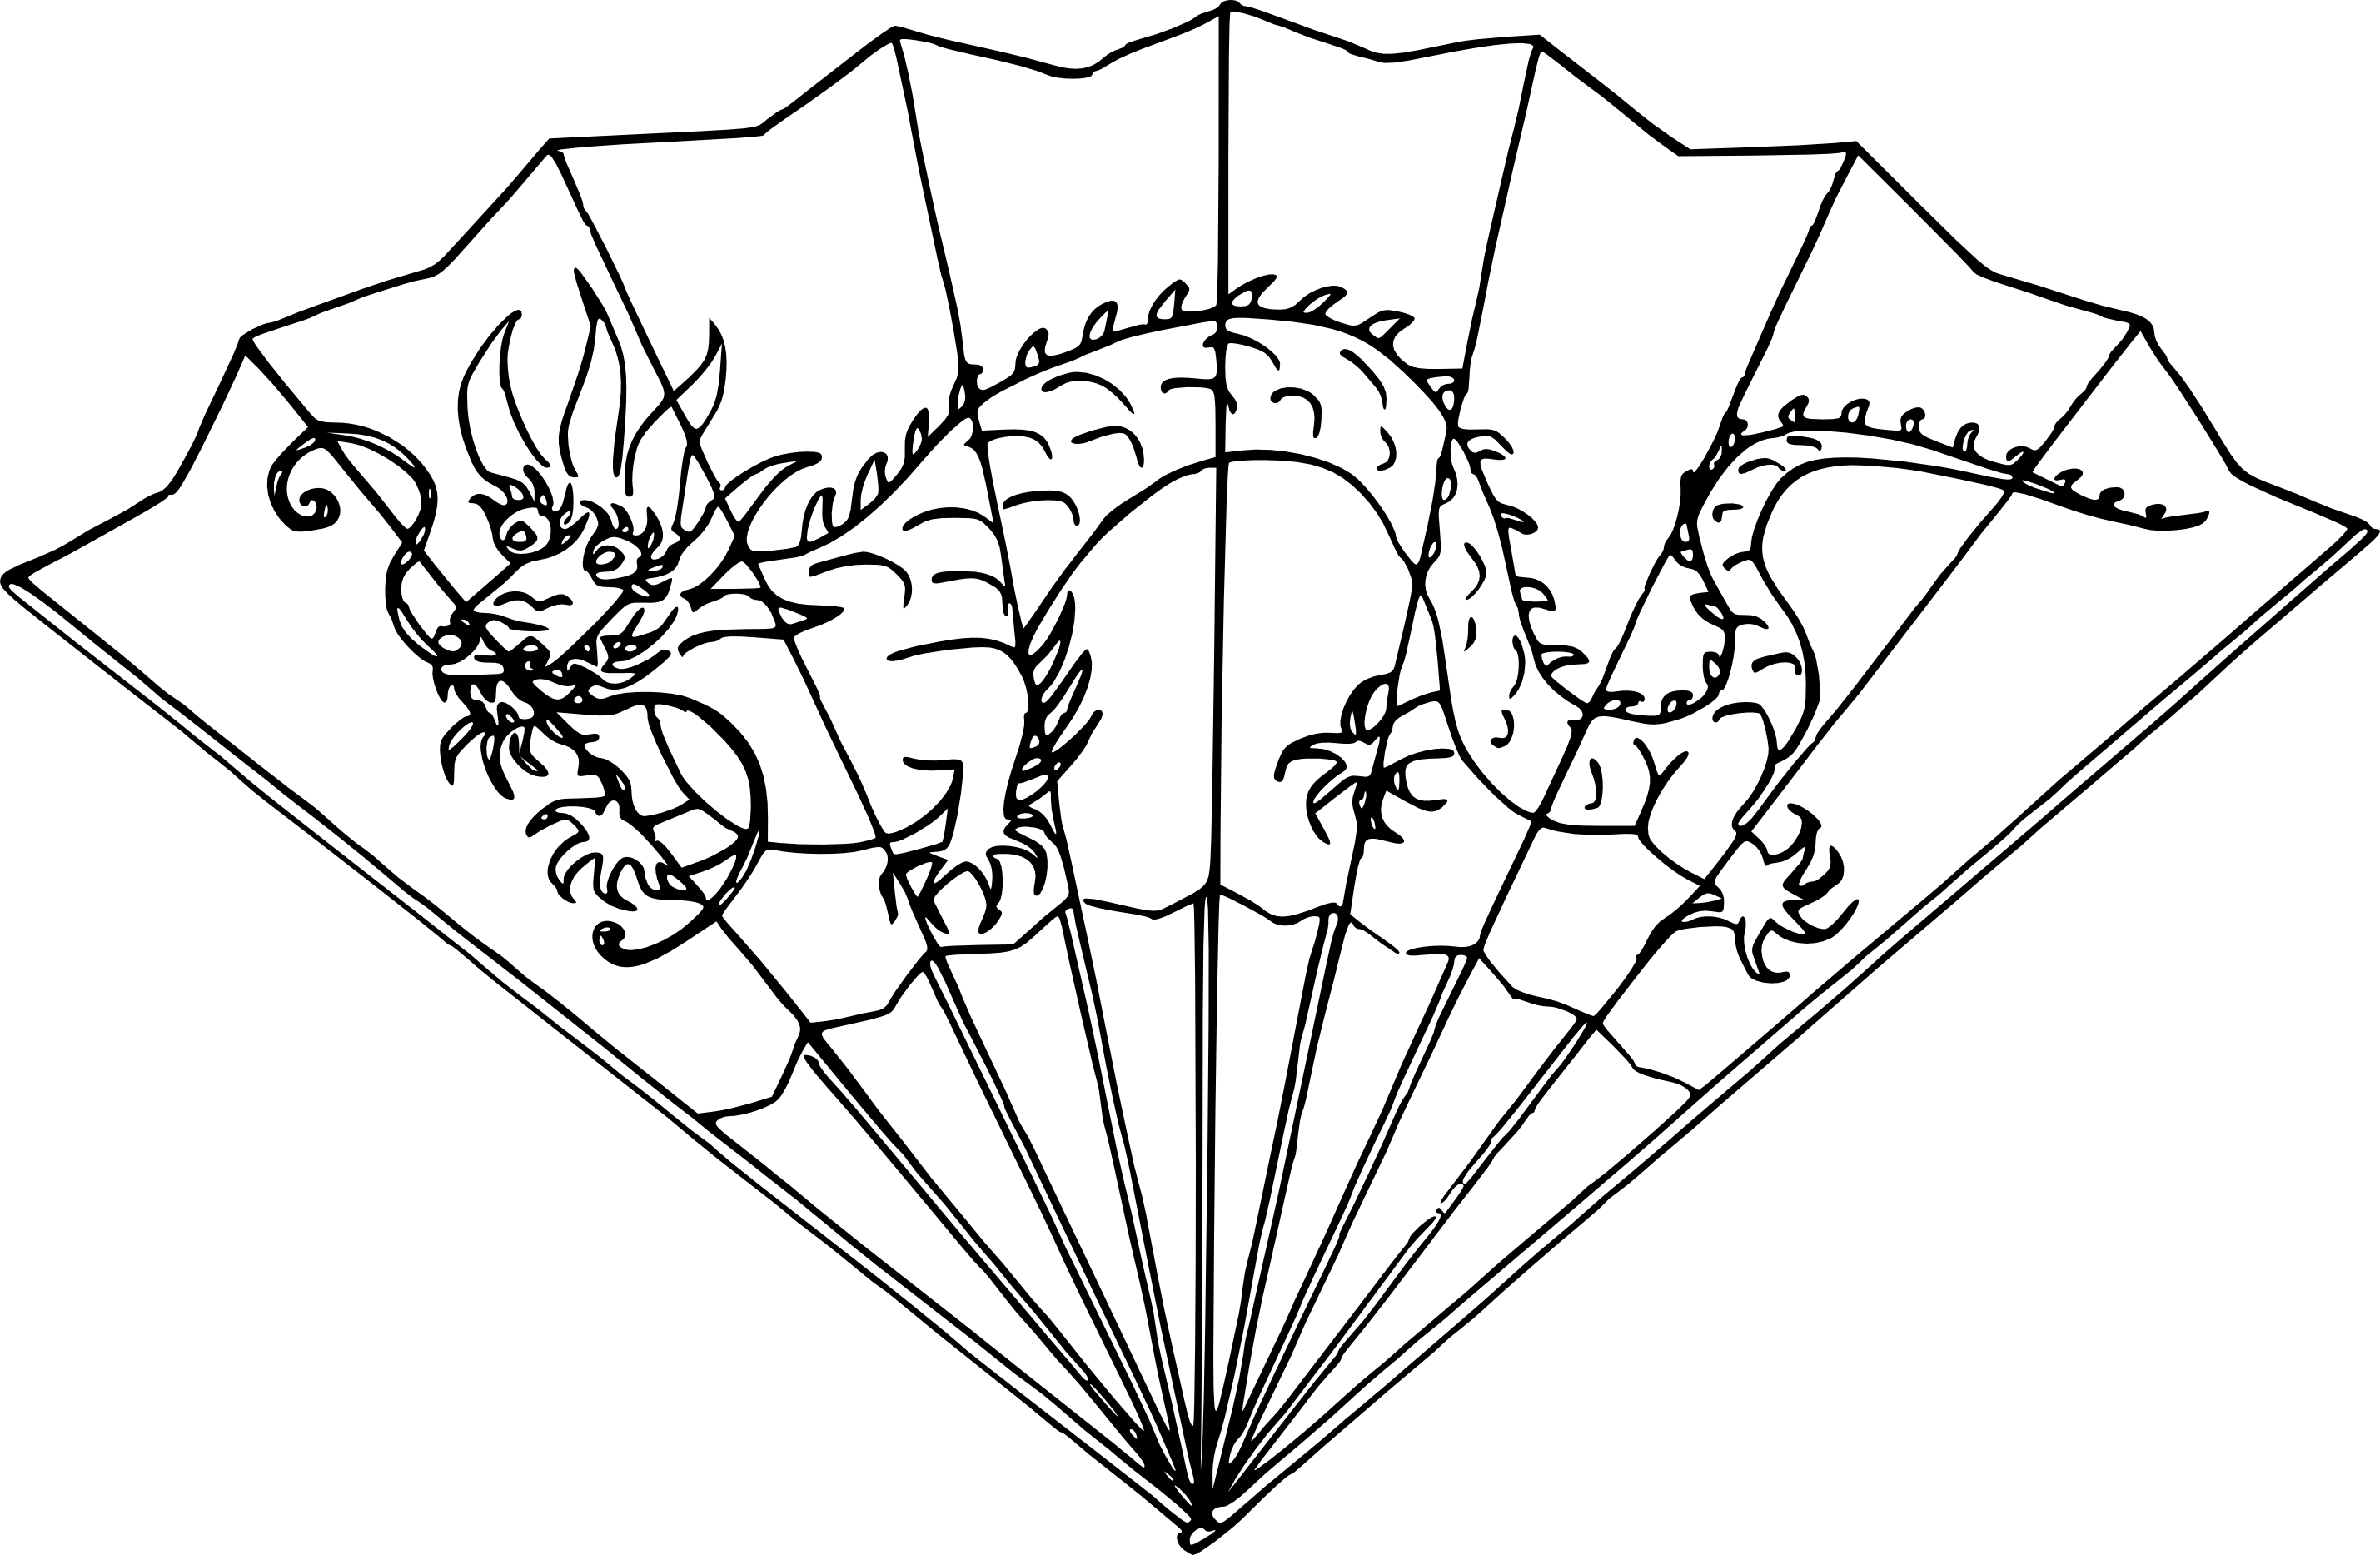 Chinese Fan coloring page